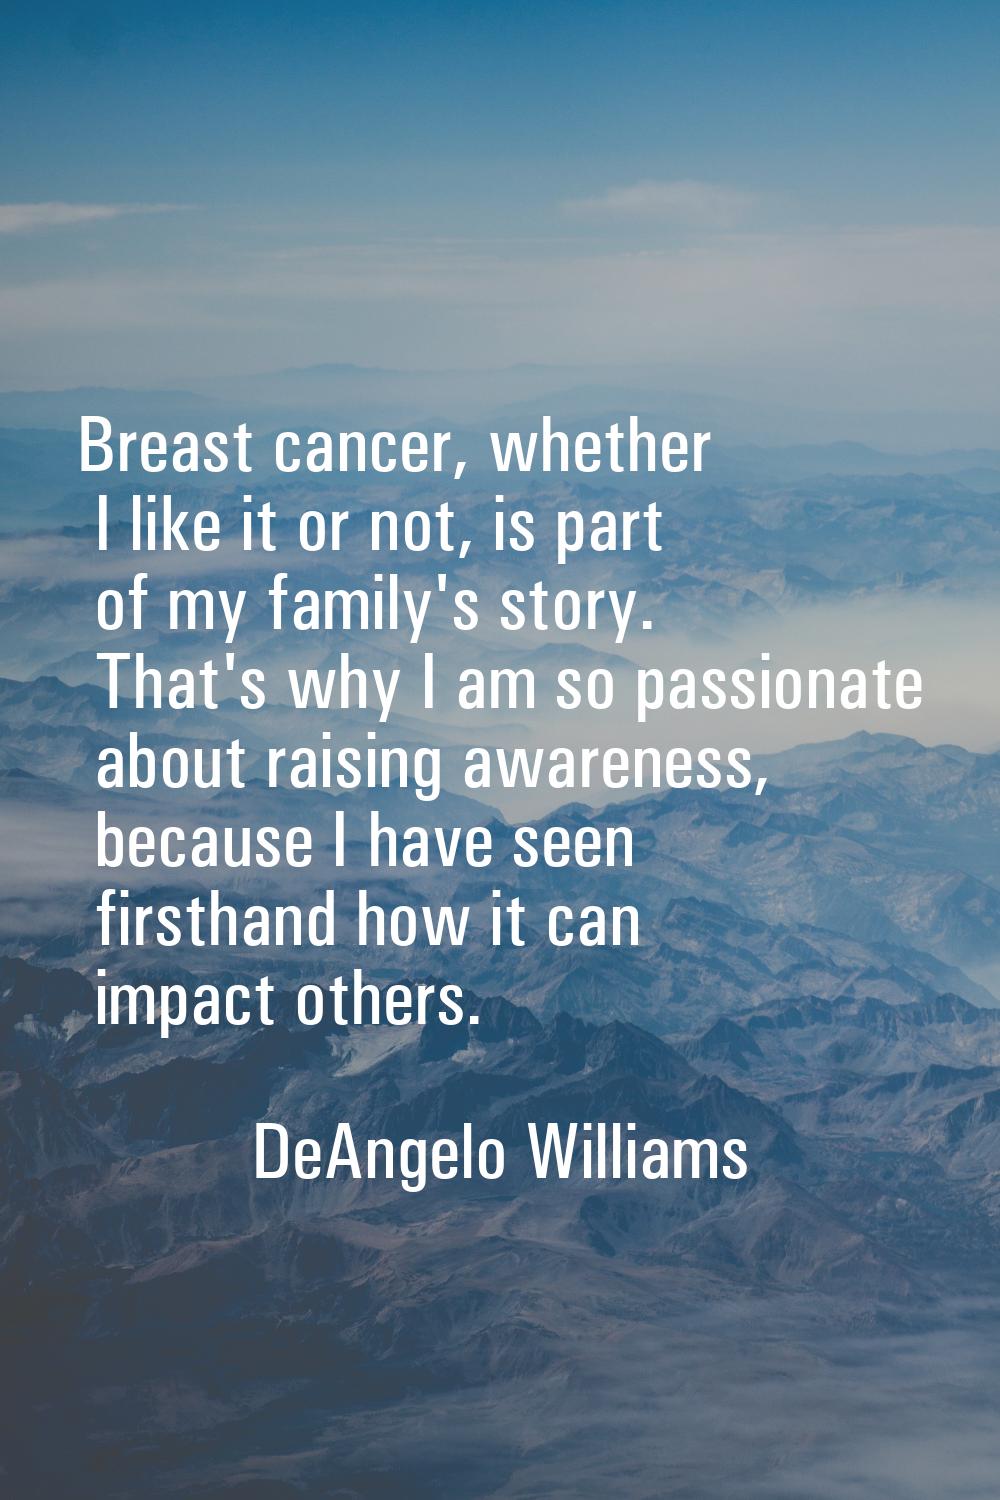 Breast cancer, whether I like it or not, is part of my family's story. That's why I am so passionat